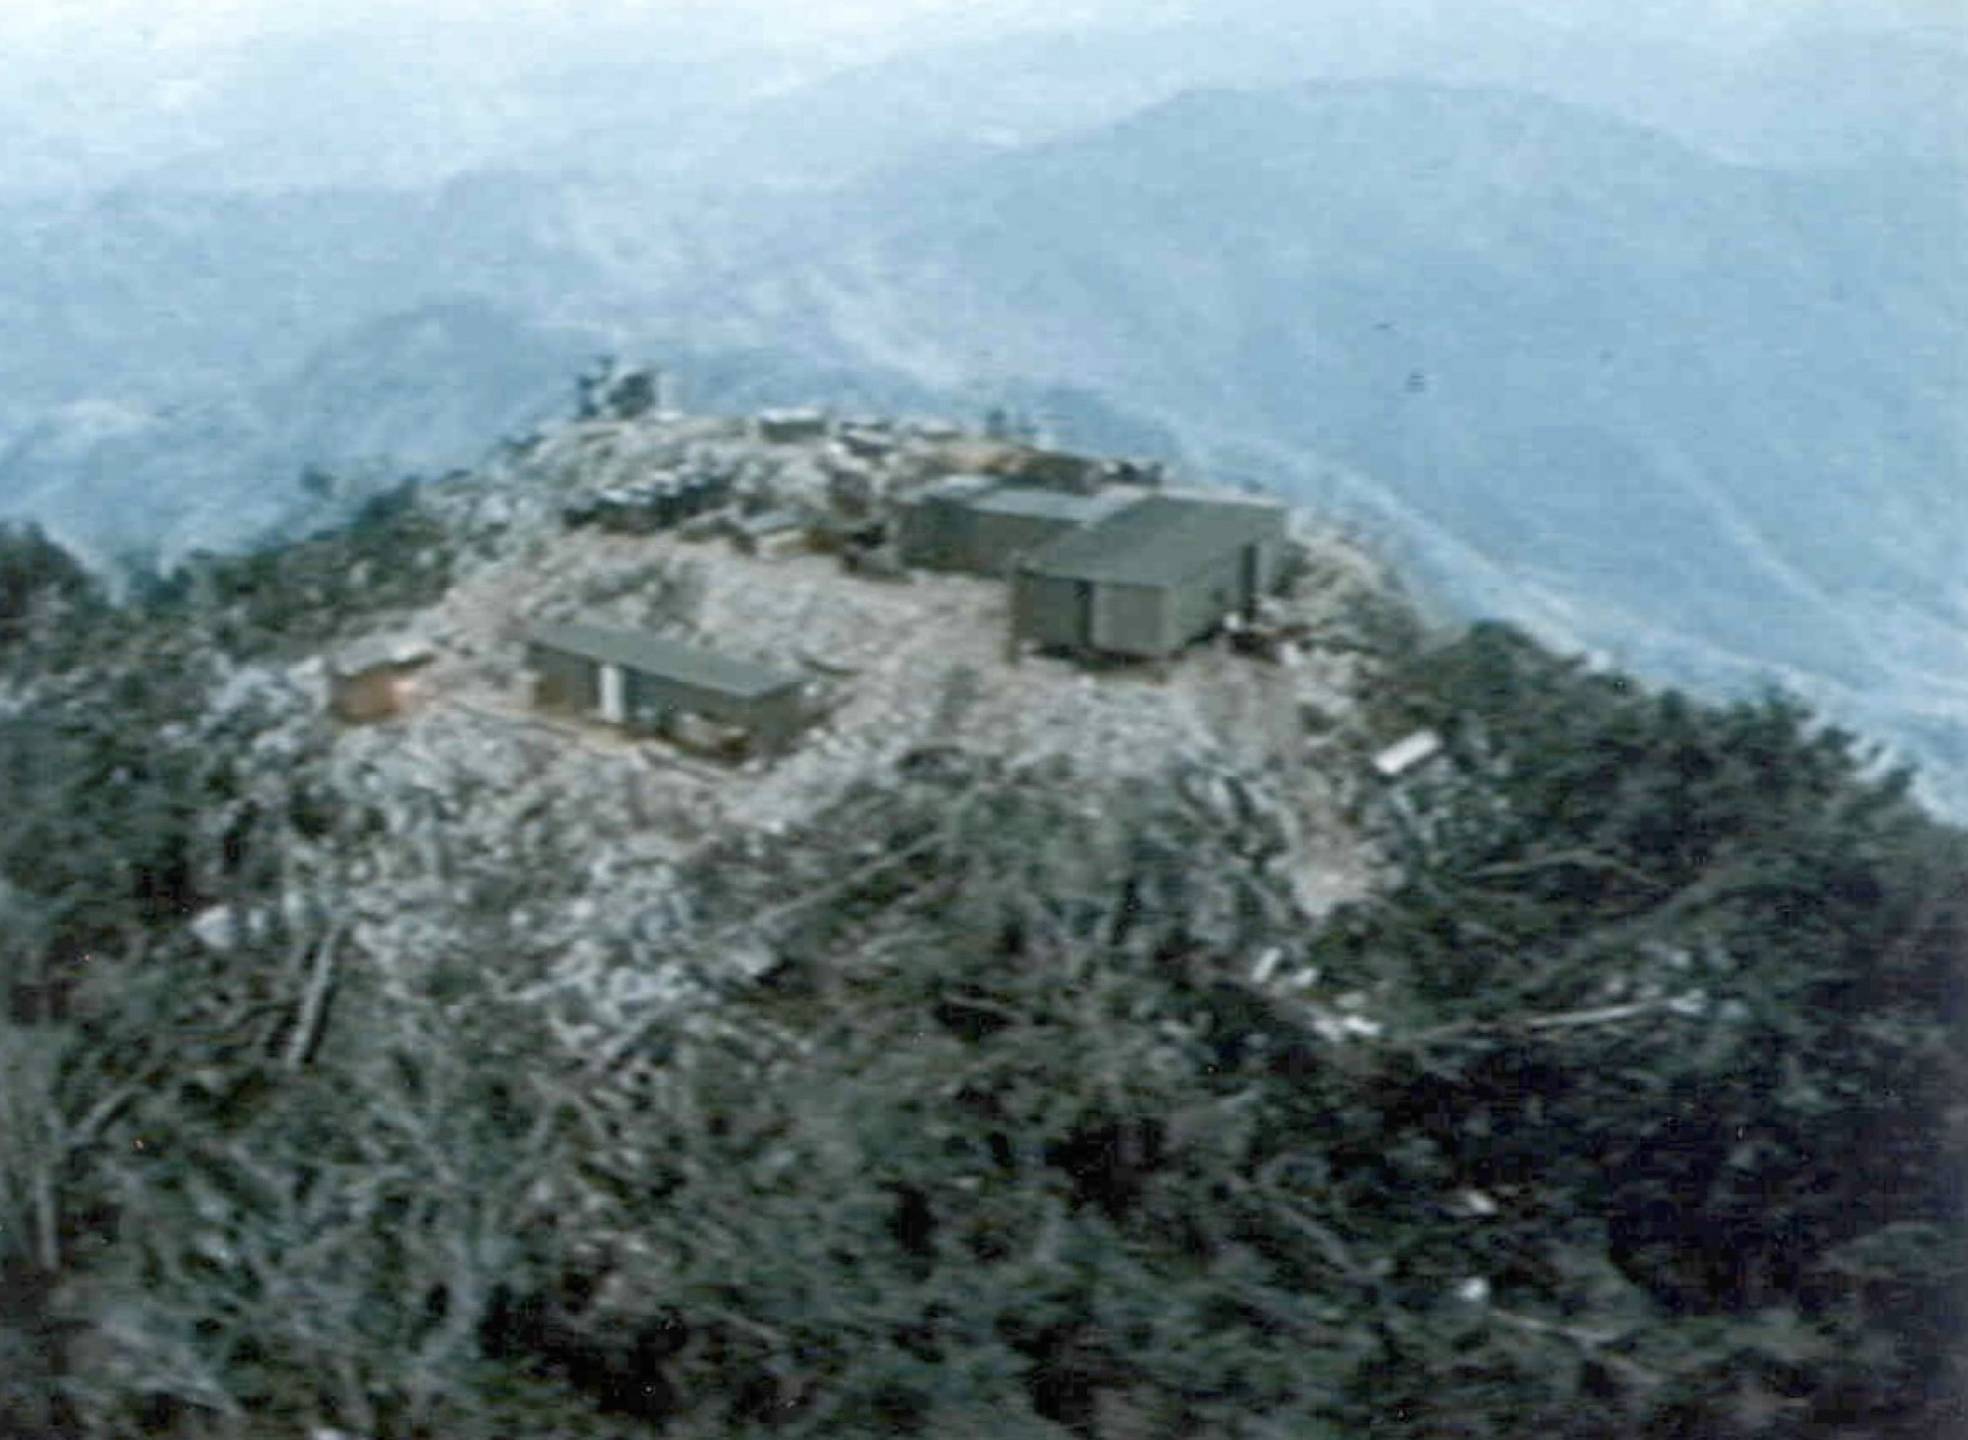 An aerial view of an encampment on the peak of a mountain.